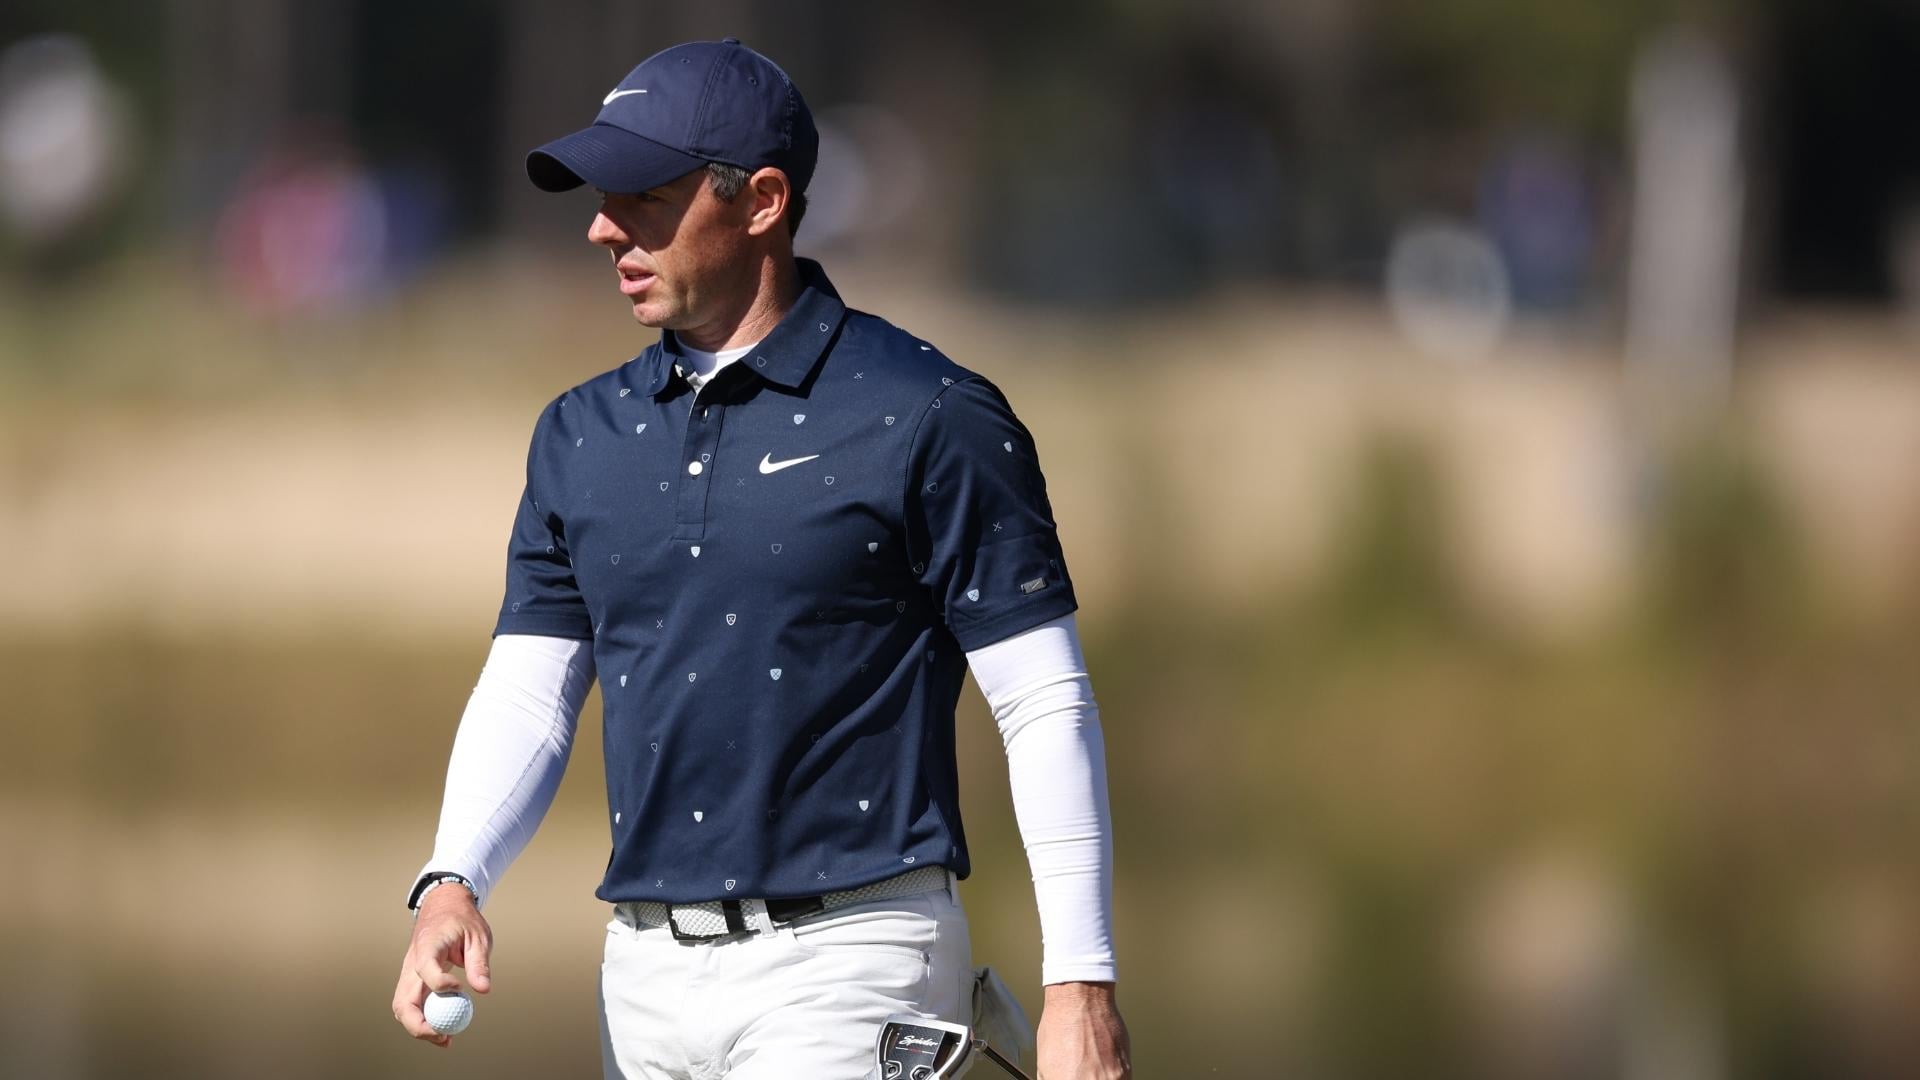 Rory McIlroy and Tom Kim put on a show at CJ Cup, both 1 off lead